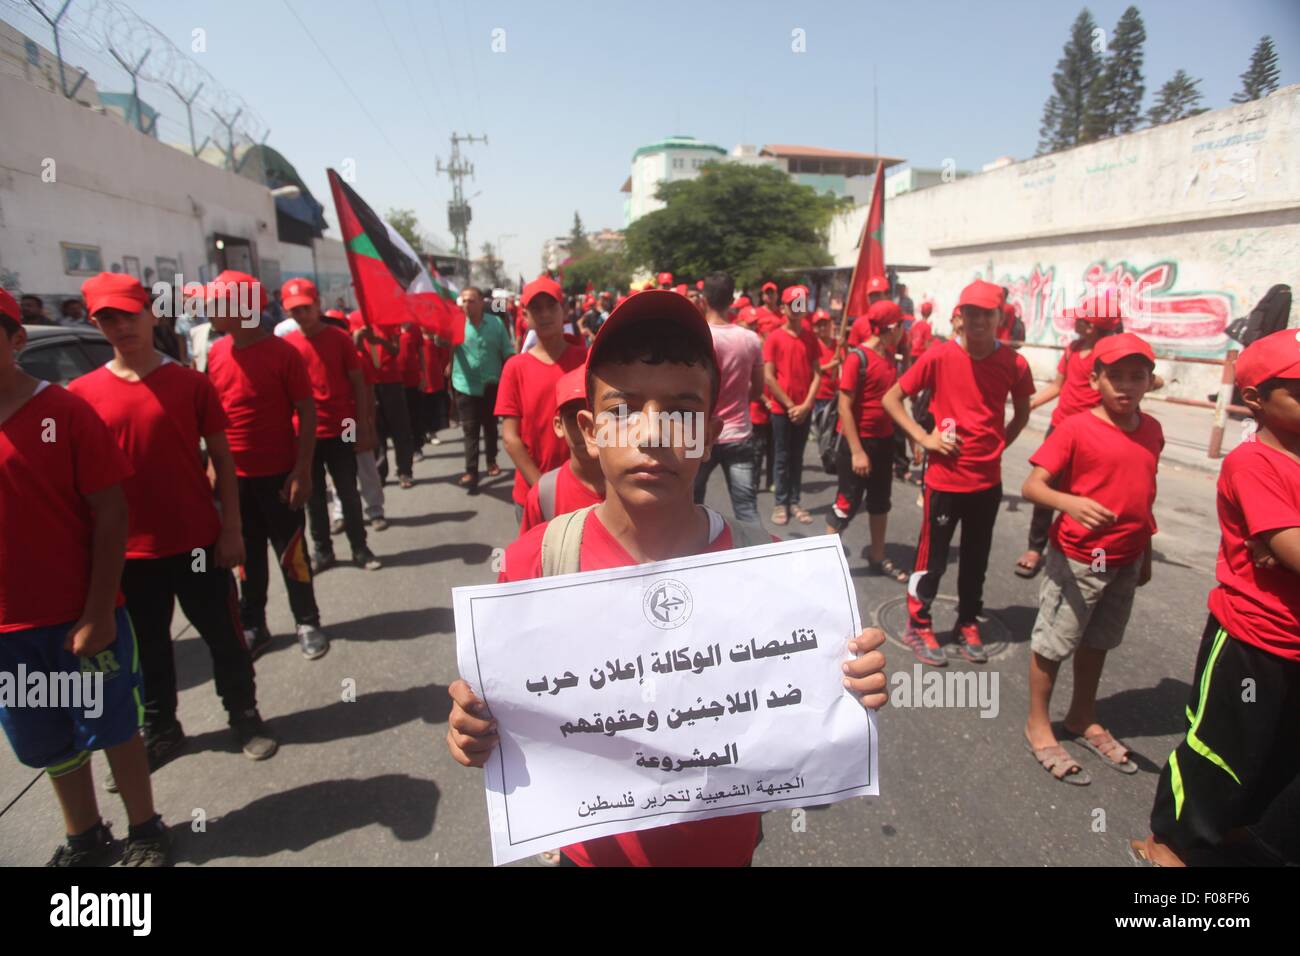 Gaza City, Gaza Strip, Palestinian Territory. 10th Aug, 2015. Palestinians supporters of the Popular Front for the Liberation of Palestine (PFLP) take part in a protest against the reduction of educational programs given by the United Nations Relief and Works Agency (UNRWA) in Gaza City, on August 10, 2015. The Deputy Commissioner-General Sandra Mitchell, explained the crisis' potential consequences for beneficiaries and the efforts UNRWA is undertaking to bridge the current deficit of US$ 101 million of its General Fund. In a town hall meeting with staff members, she stated that UNRWA is Stock Photo